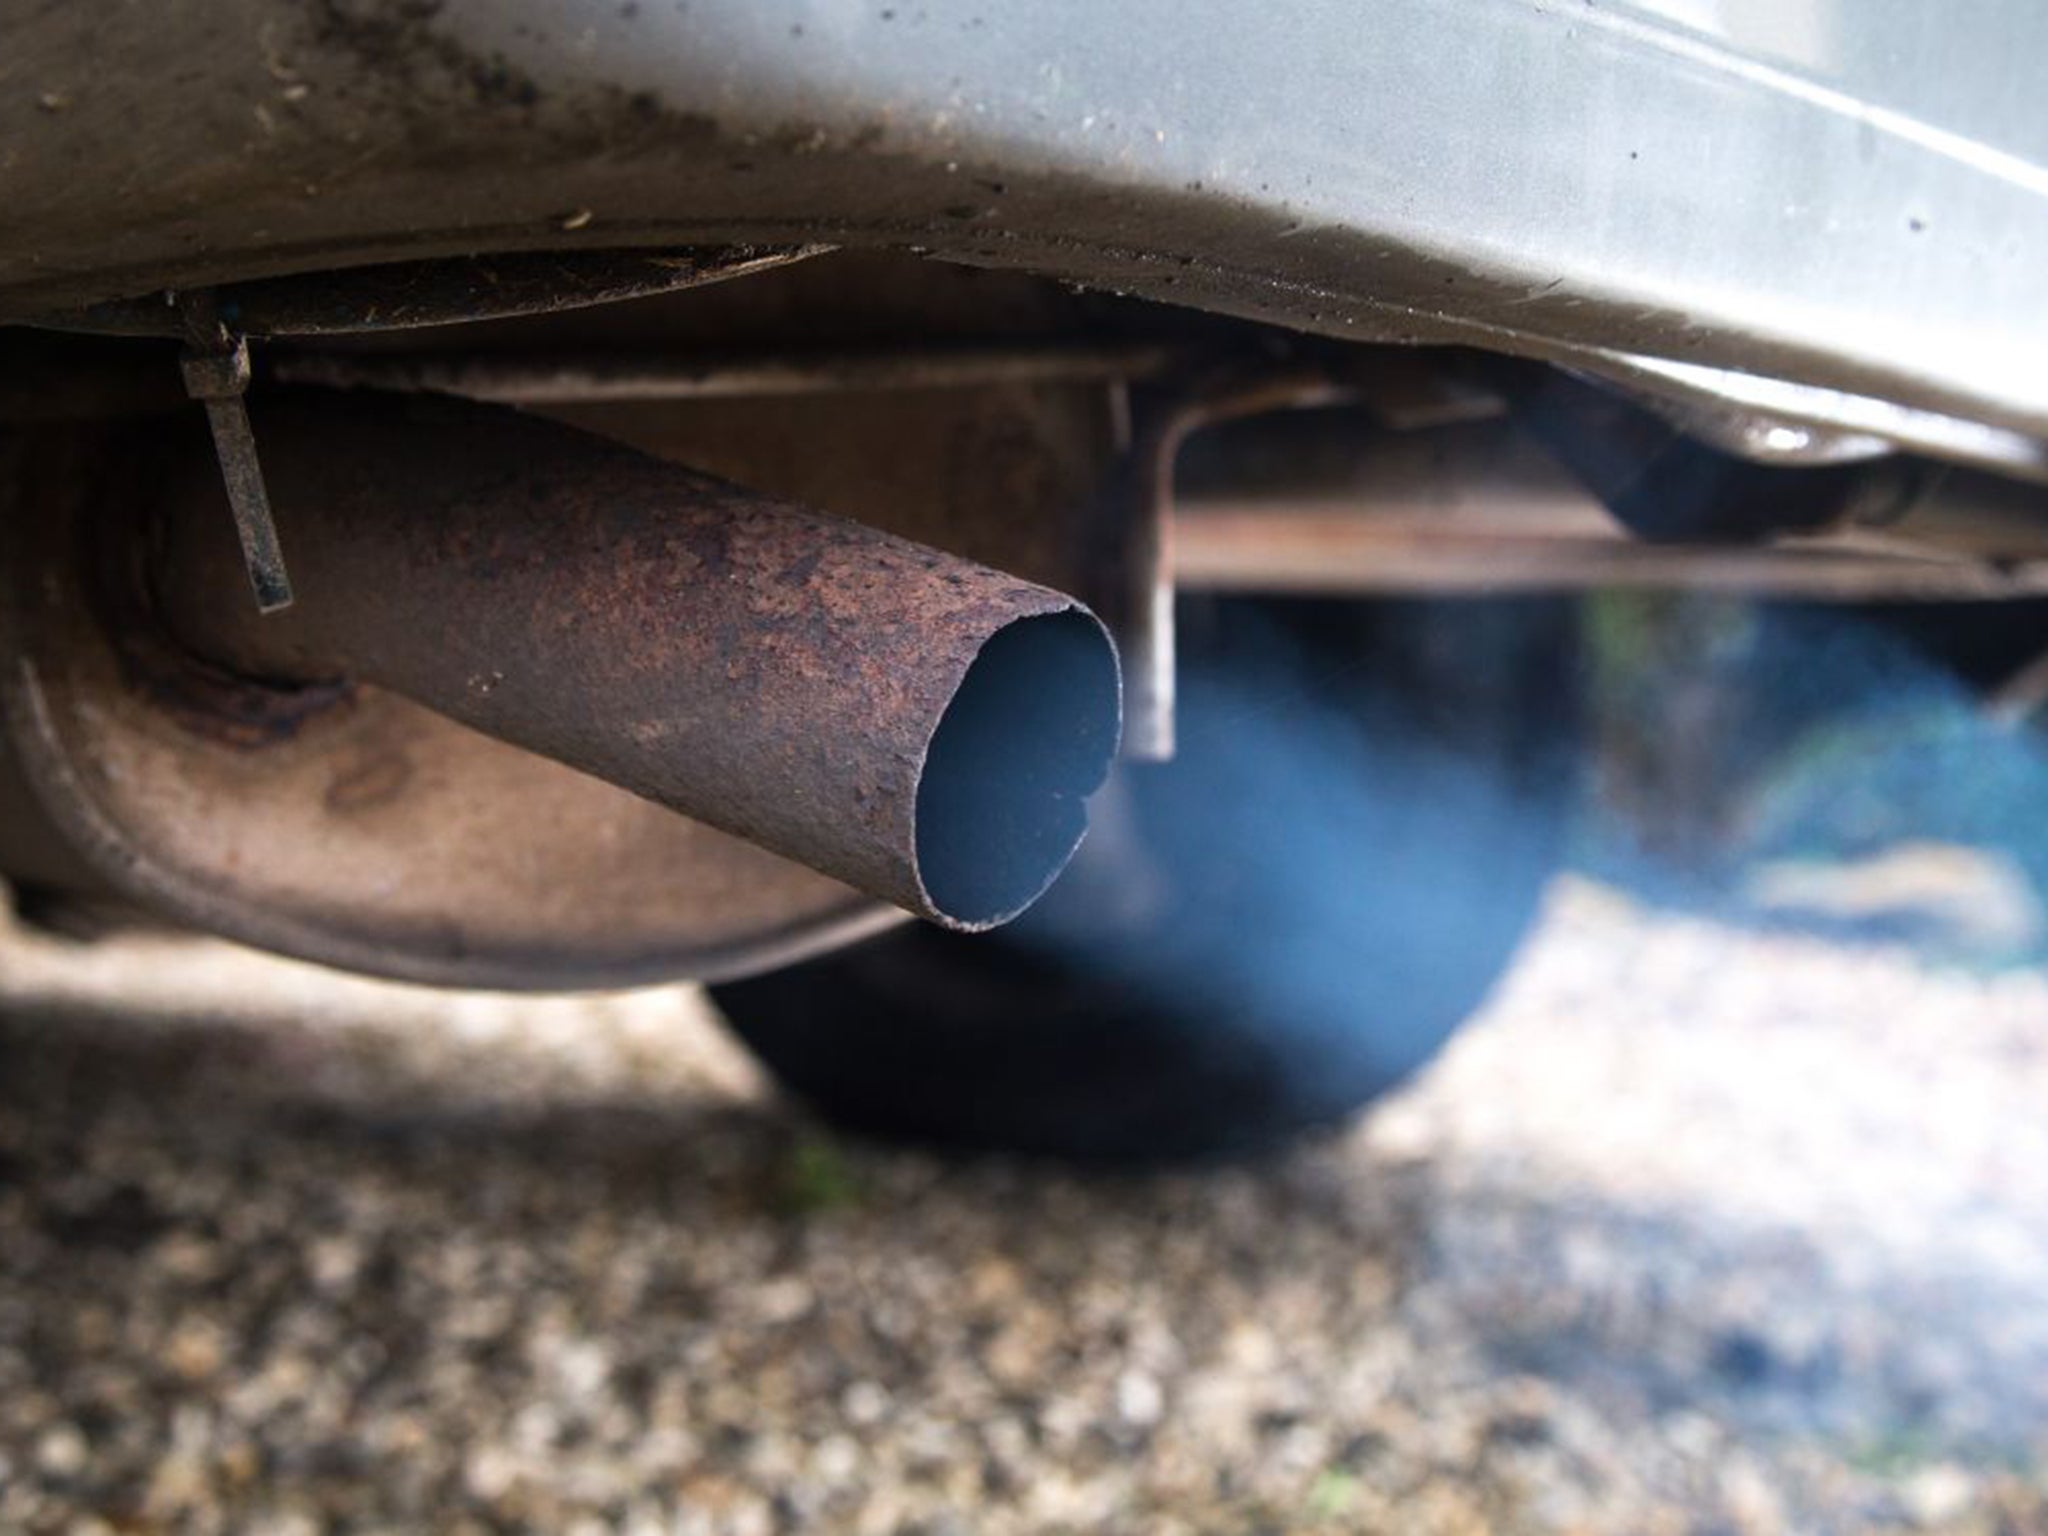 Many diesel VW cars are pumping out illegal toxins